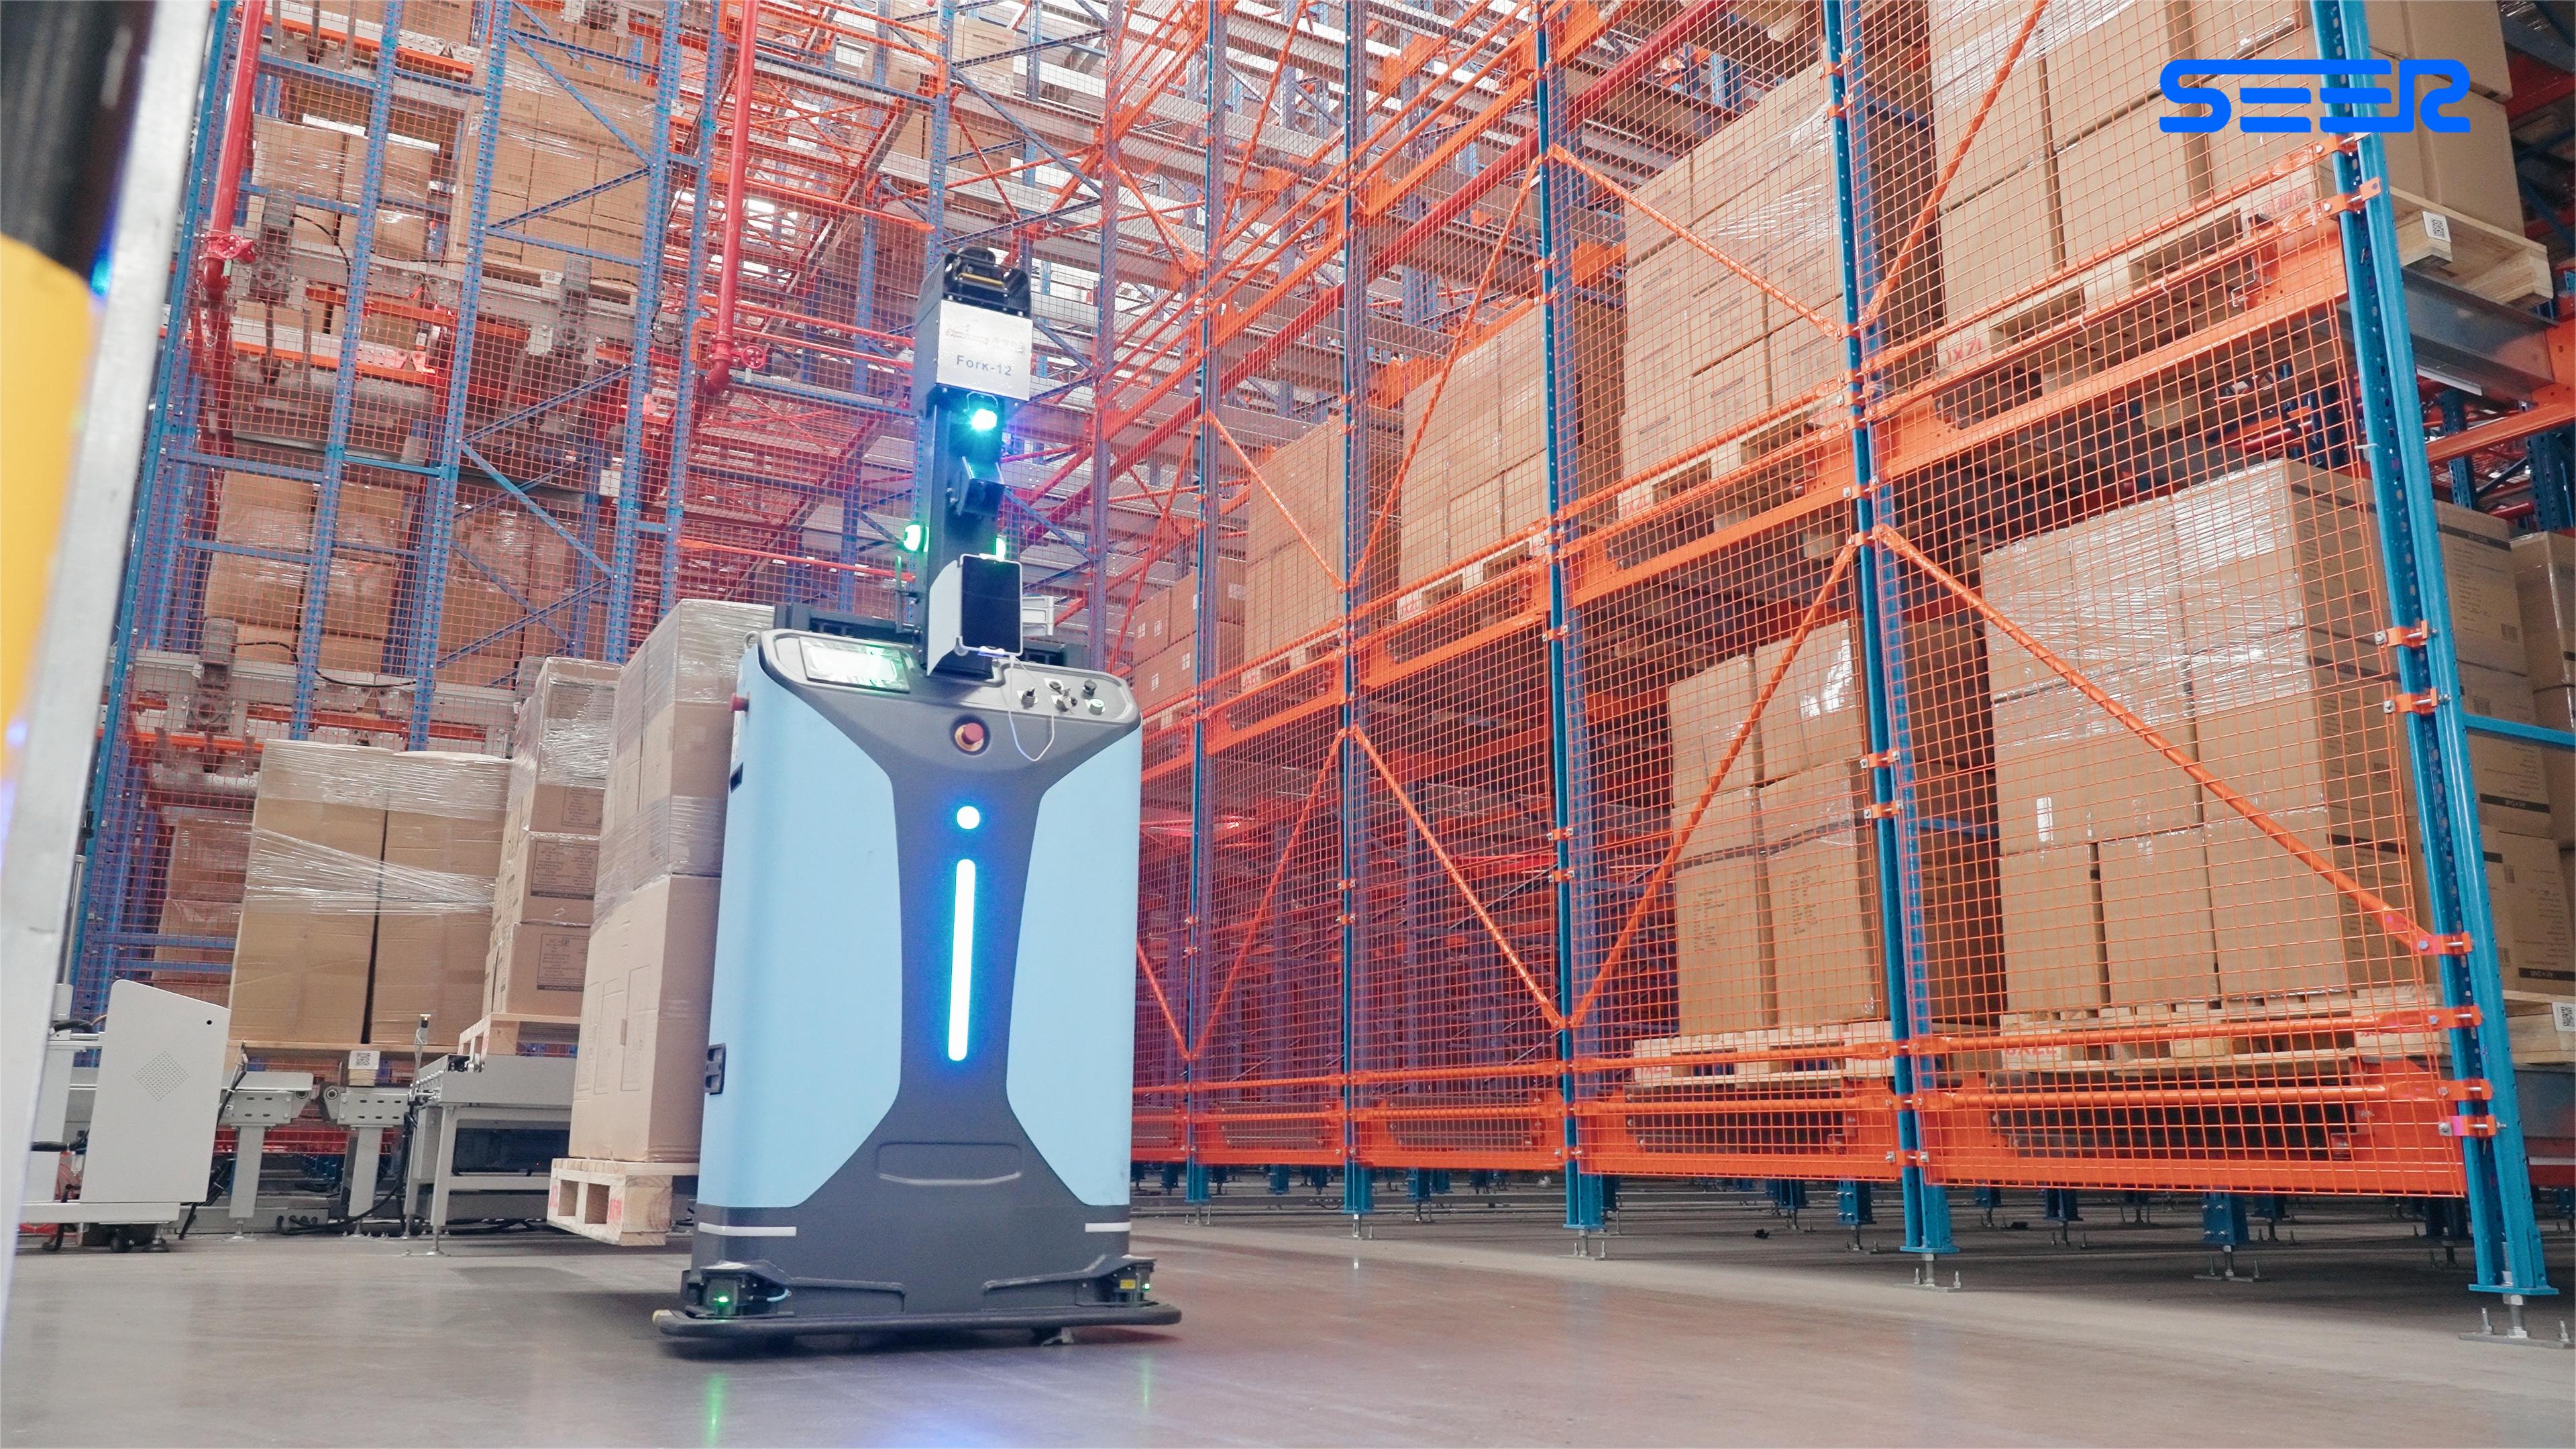 SEER's AMR standard products enable 3PL industry to upgrade warehouse automation